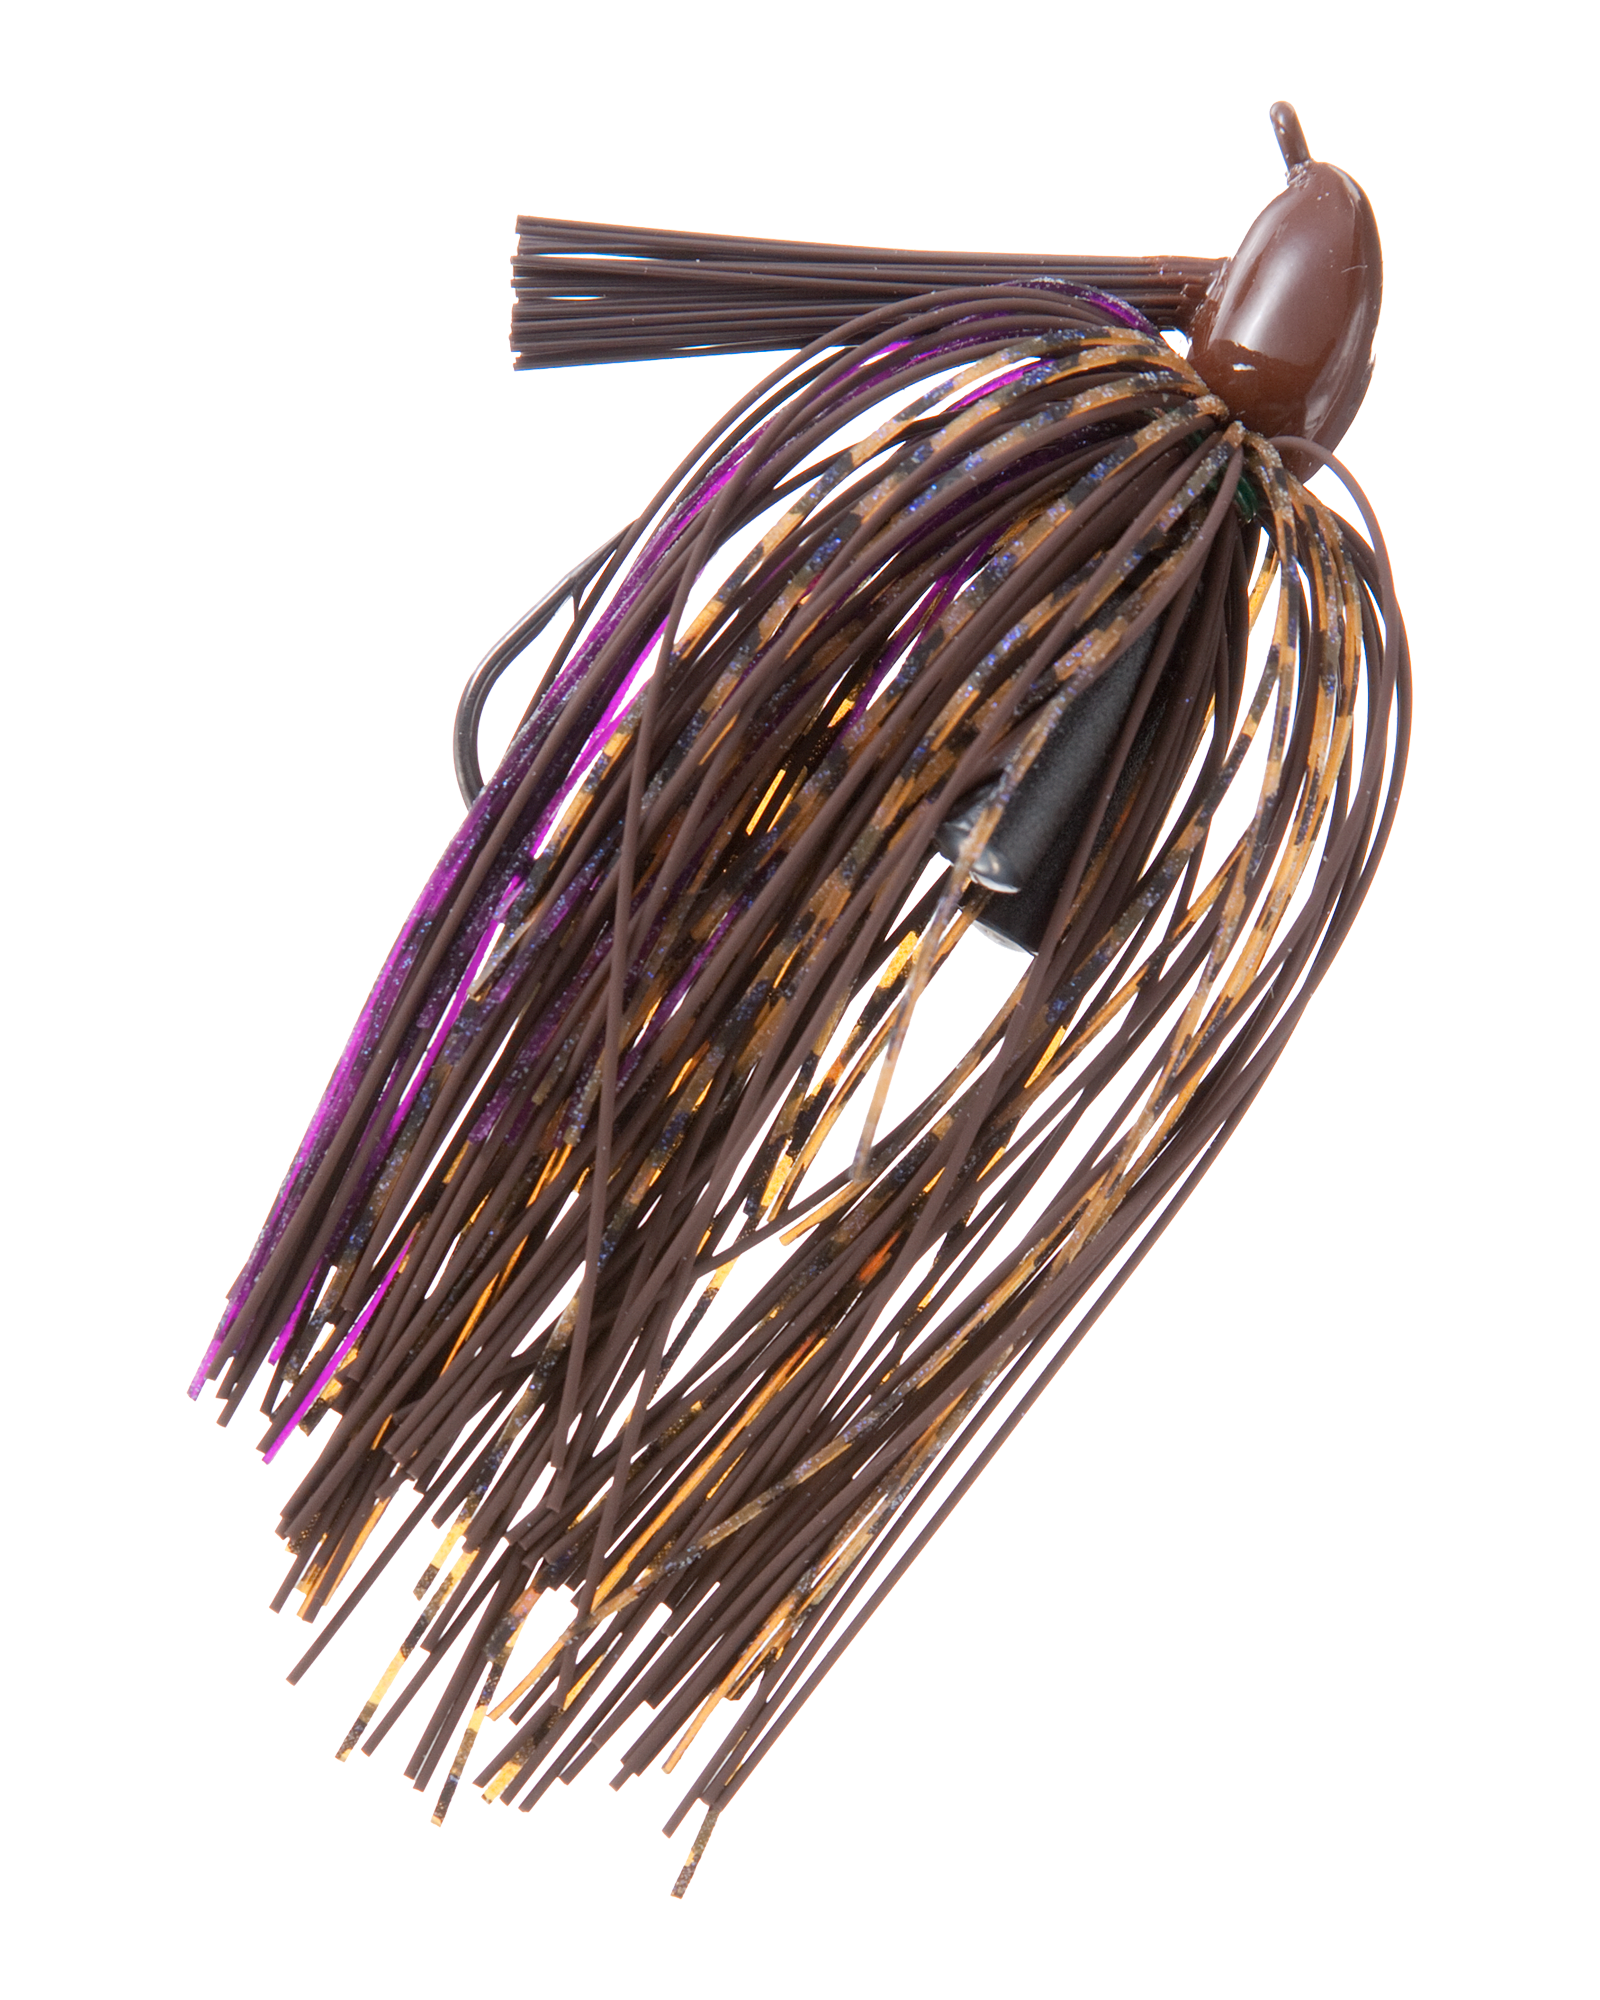 Buckeye Lures Mini Mop Jig - 3/8 oz. - Peanut Butter and Jelly